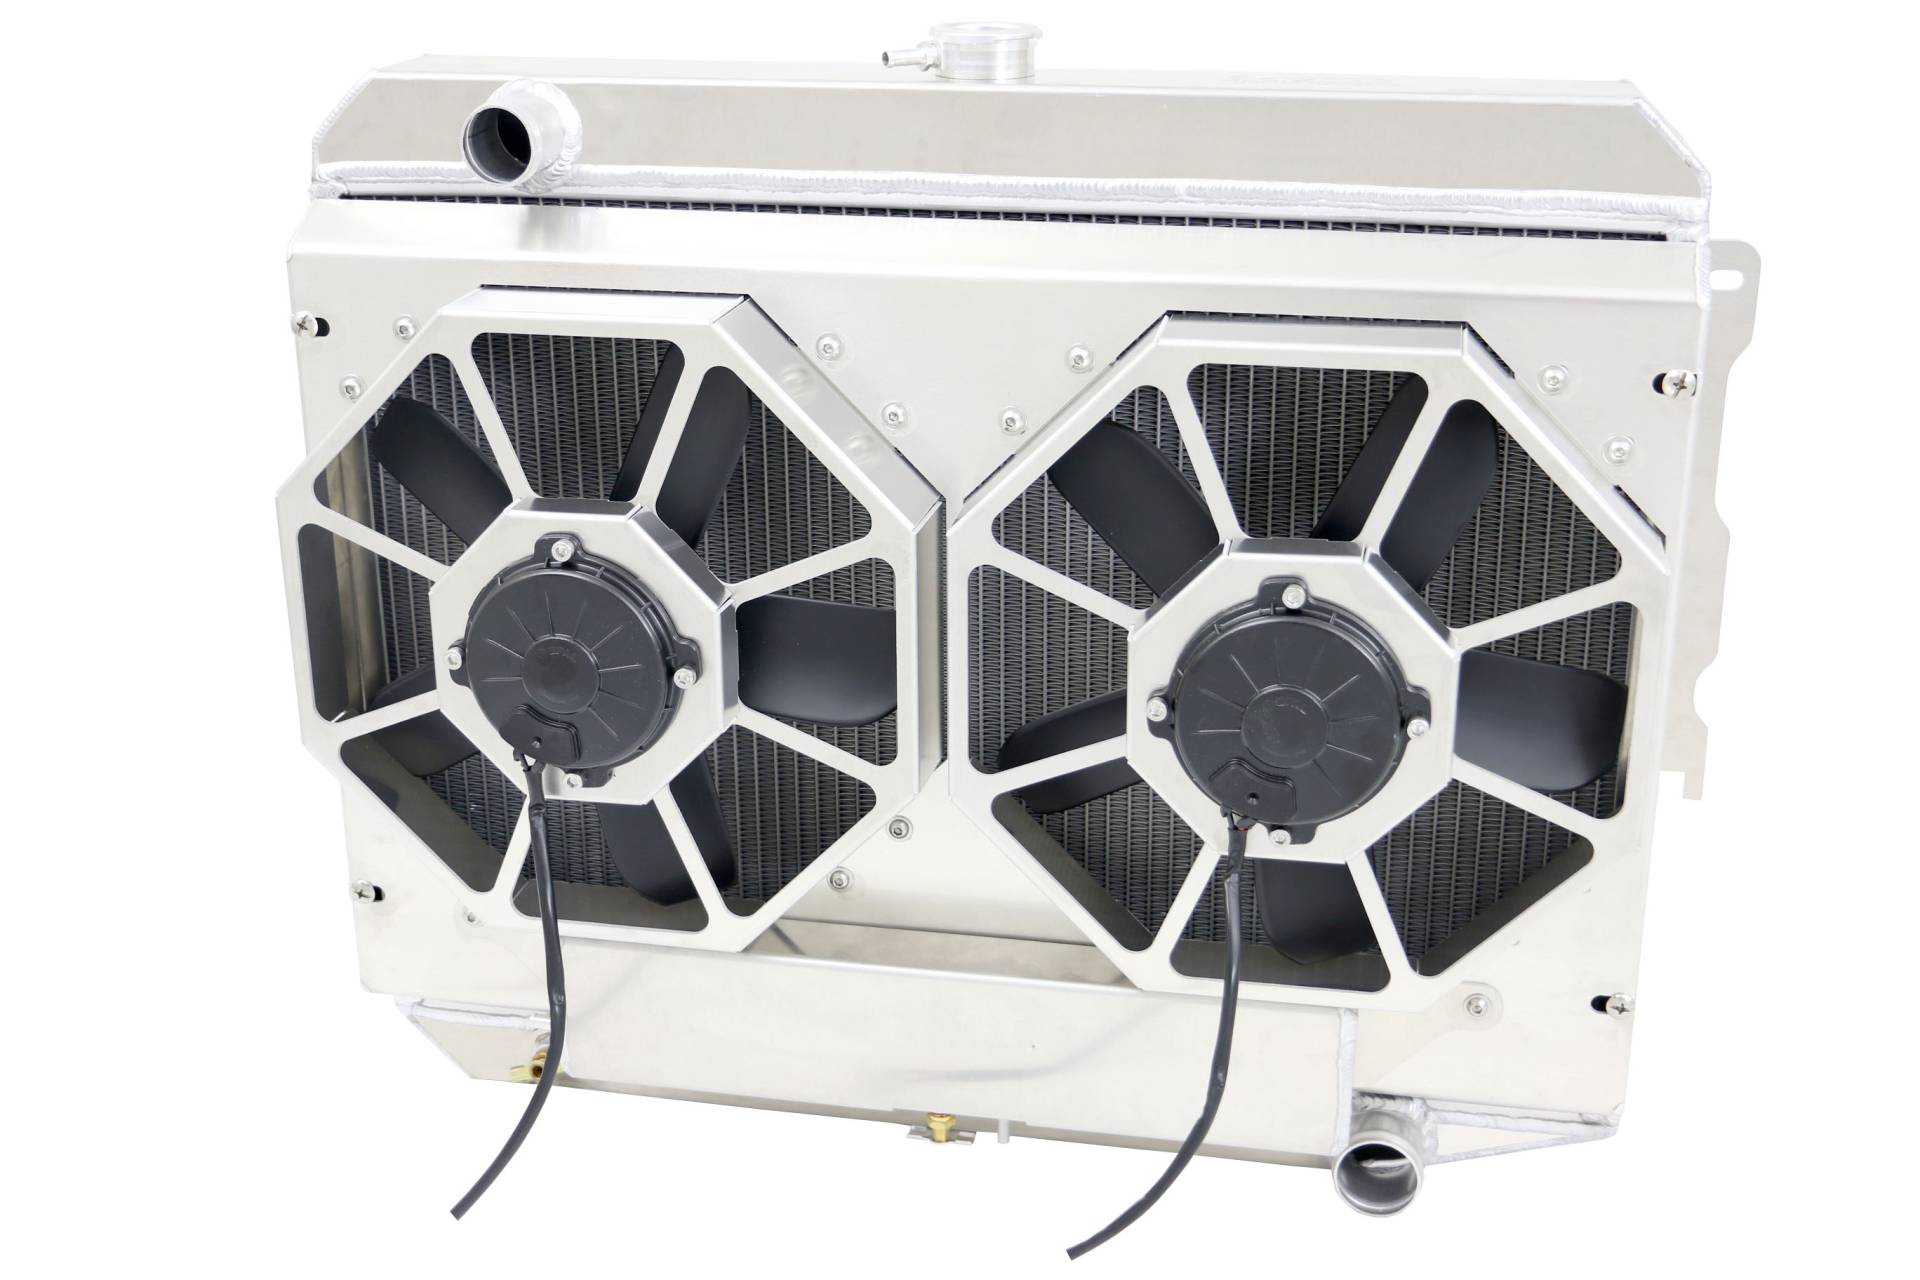 Wizard Cooling Inc - Wizard Cooling - 1970-1973 26" S/B Mopar Applications Aluminum Radiator (w/ MEDIUM PROFILE Fan, Integrated Shroud, And Expansion Tank) - 374-106MDX